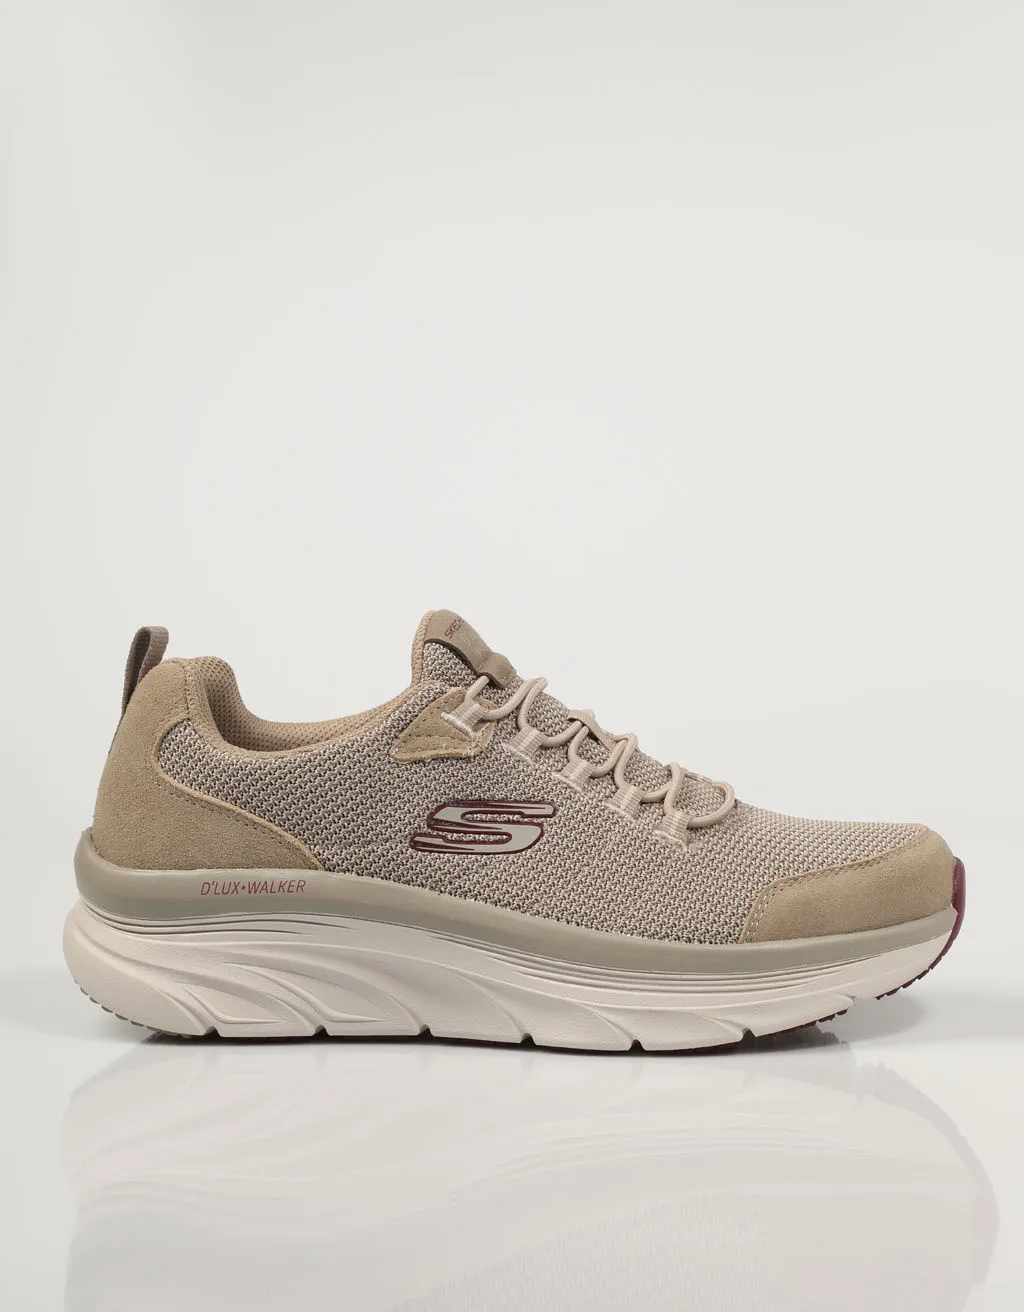 SKECHERS D LUX WALKER TAUPE SNEAKERS Beige canvas SNEAKERS Man Shoes Casual Fashion 76251 _ AliExpress Mobile